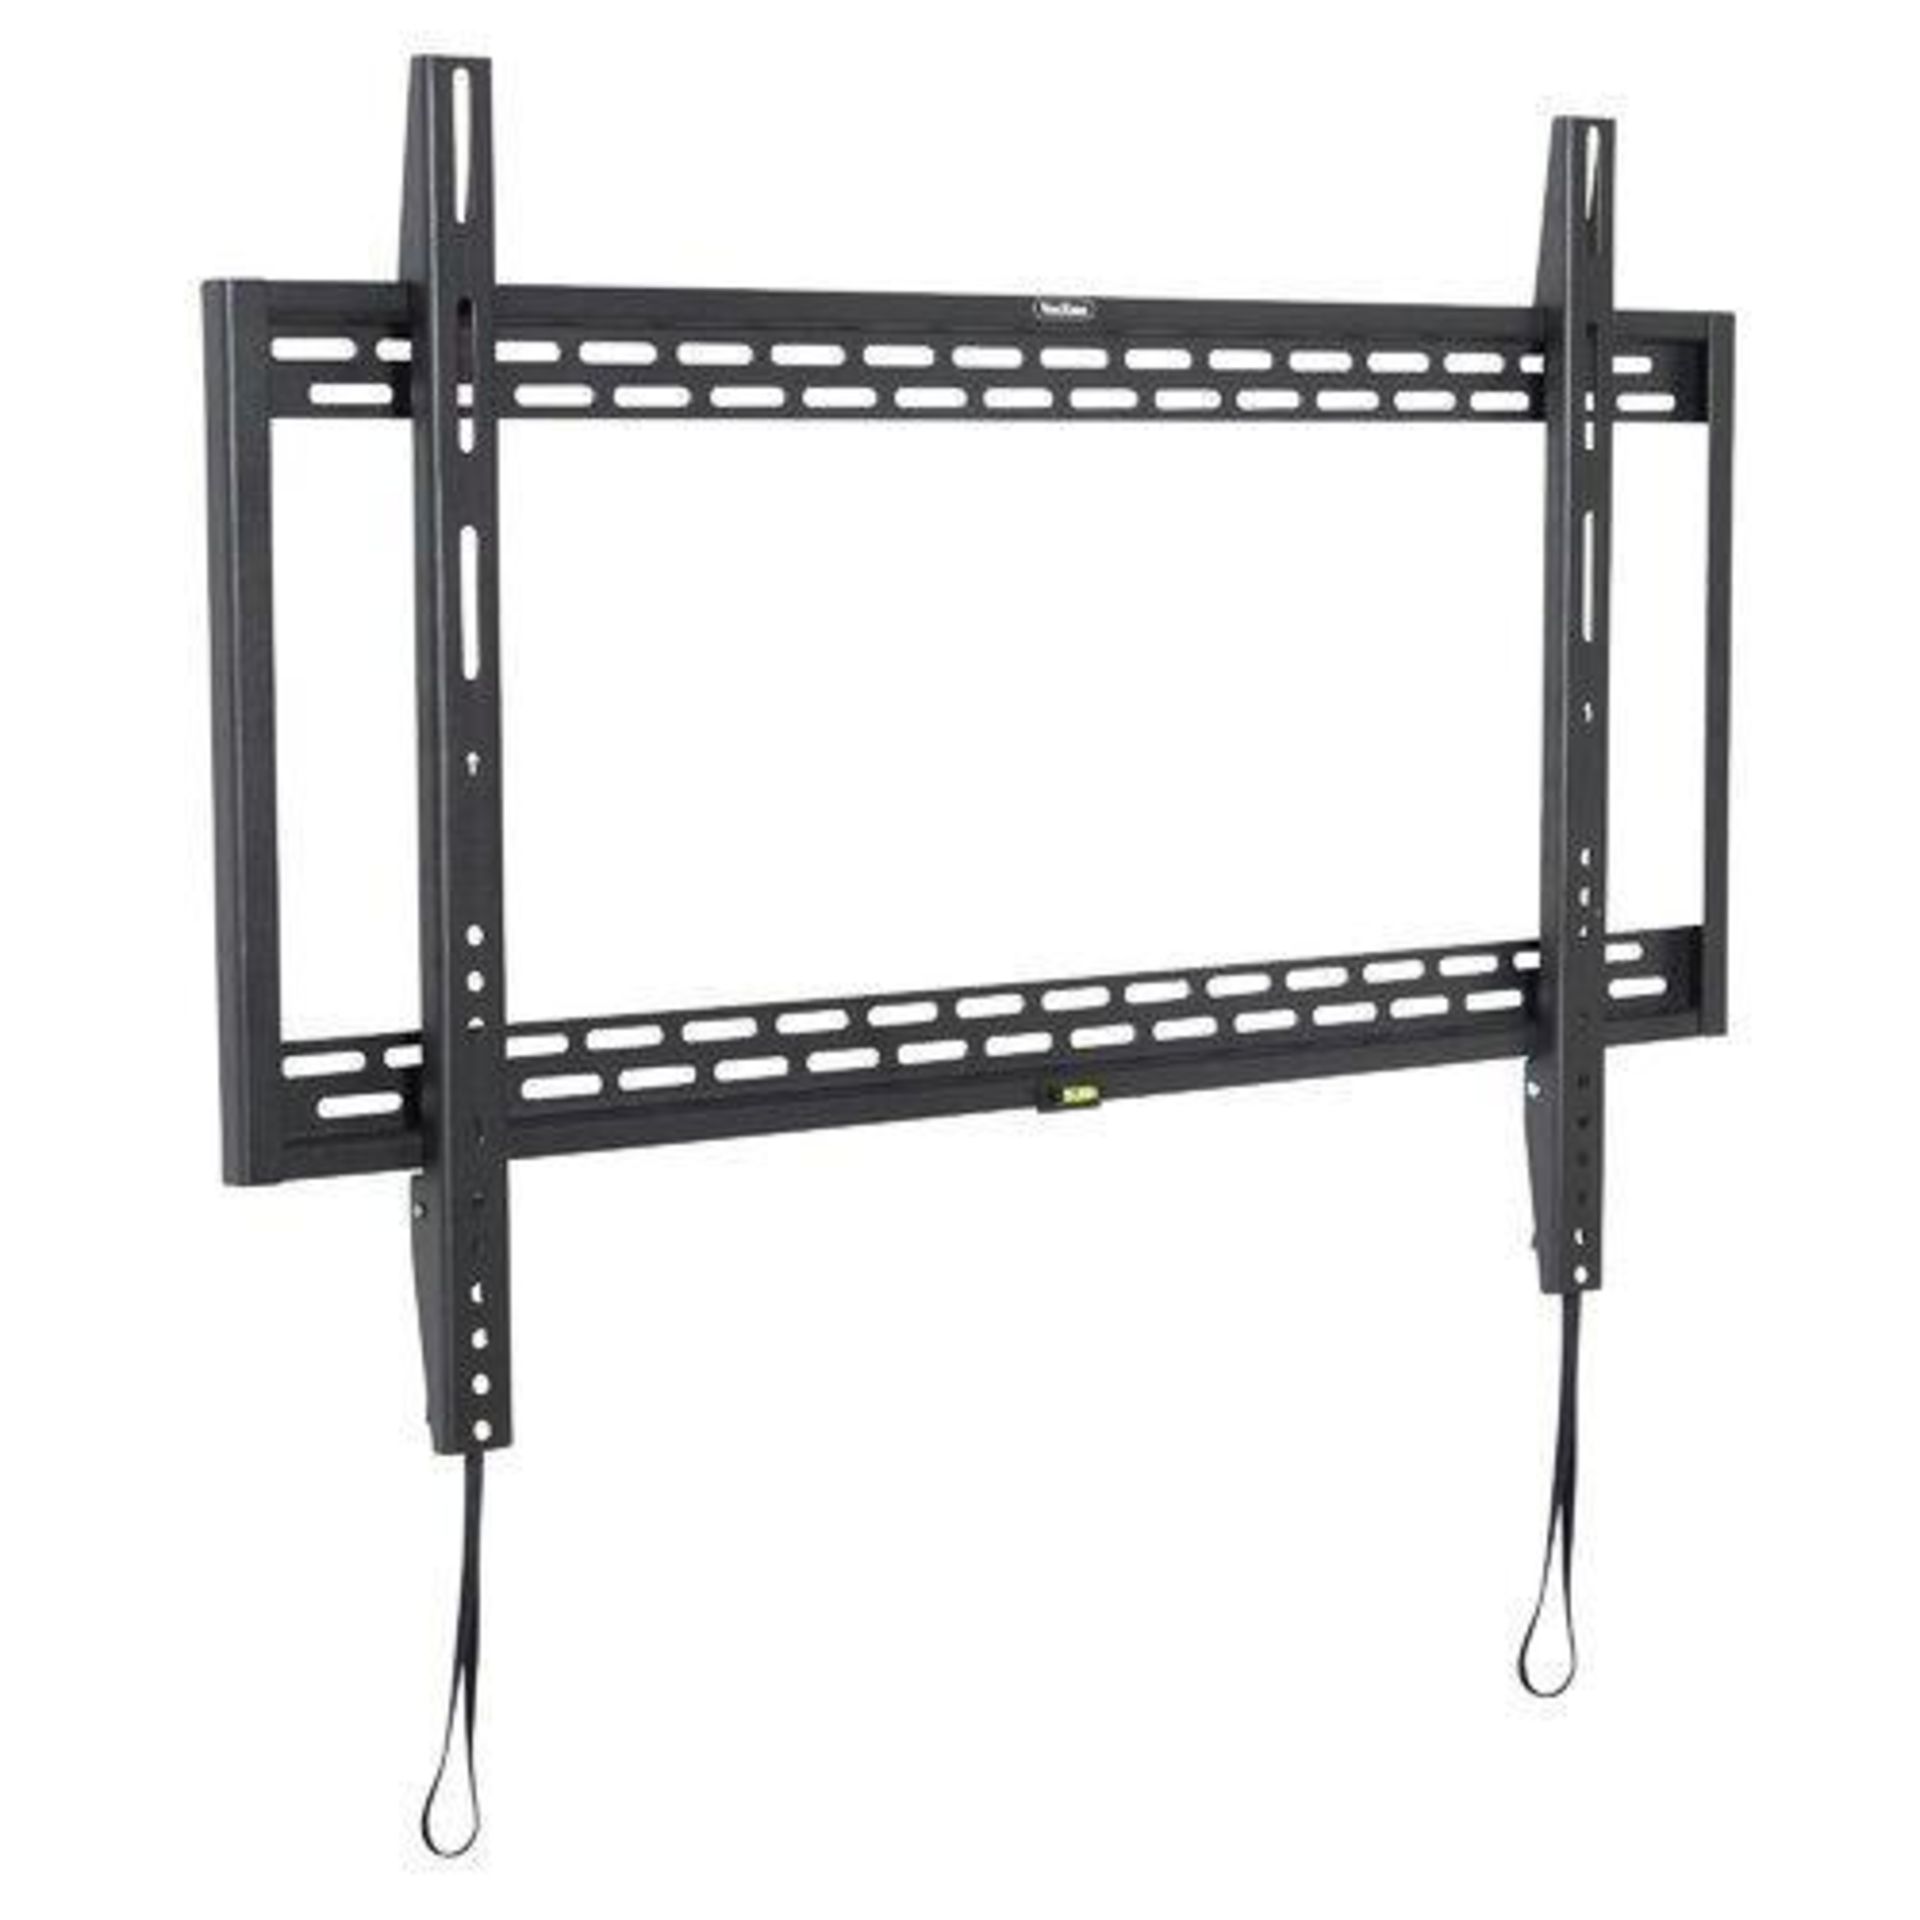 60-100 Inch Flat-to-wall TV Bracket 60-100 inch Flat-to-wall TV bracketTransform your TV viewing